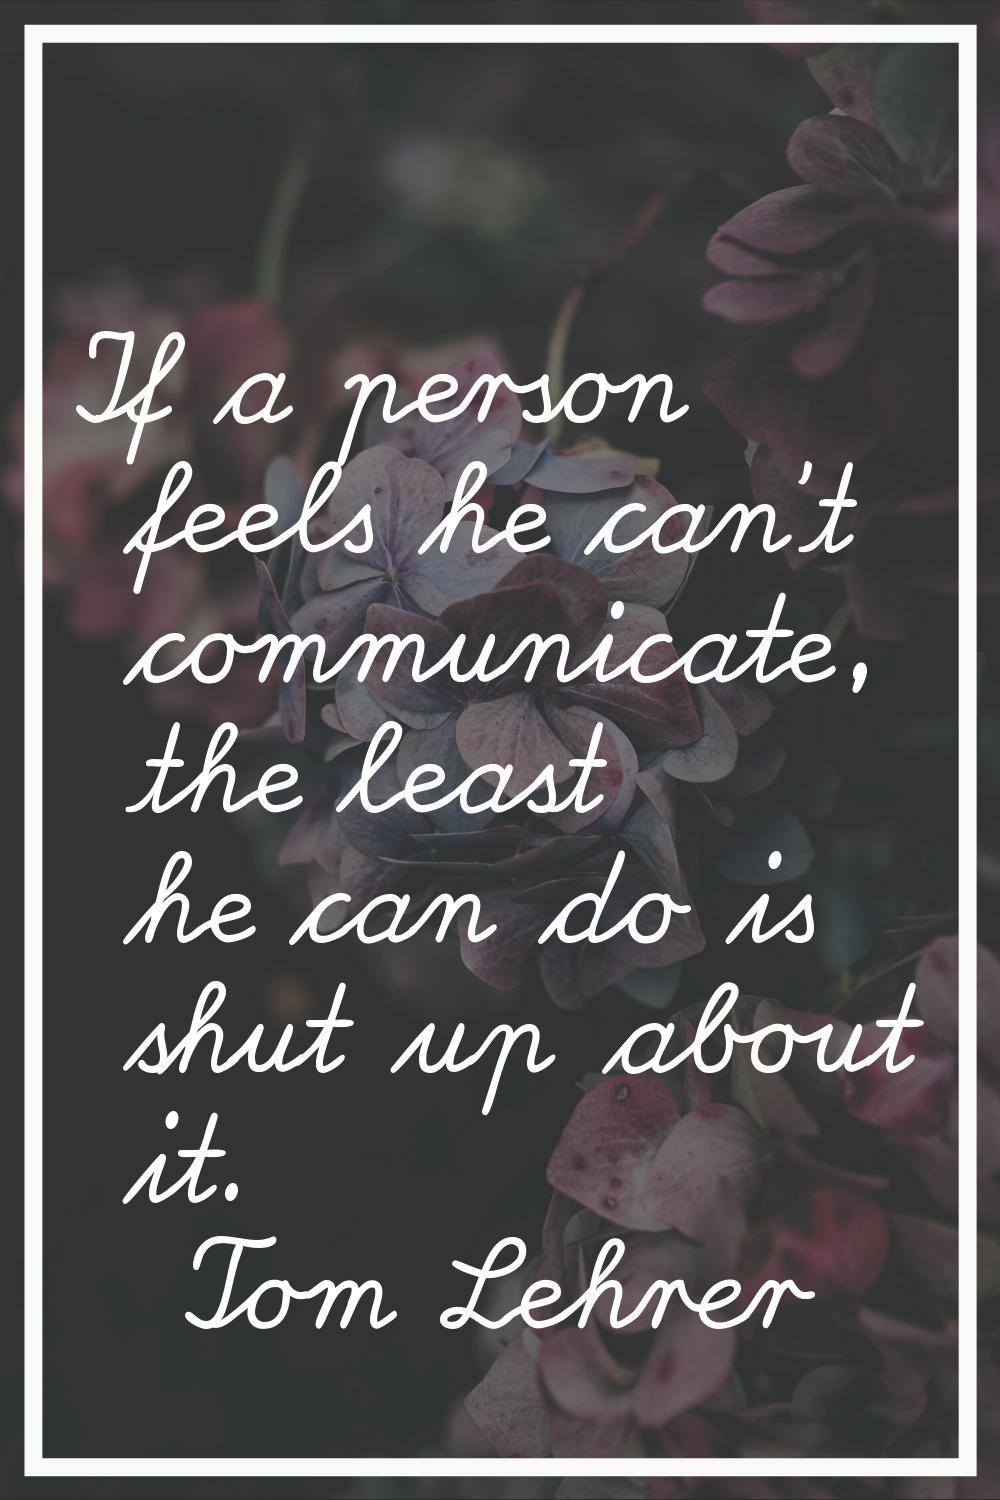 If a person feels he can't communicate, the least he can do is shut up about it.